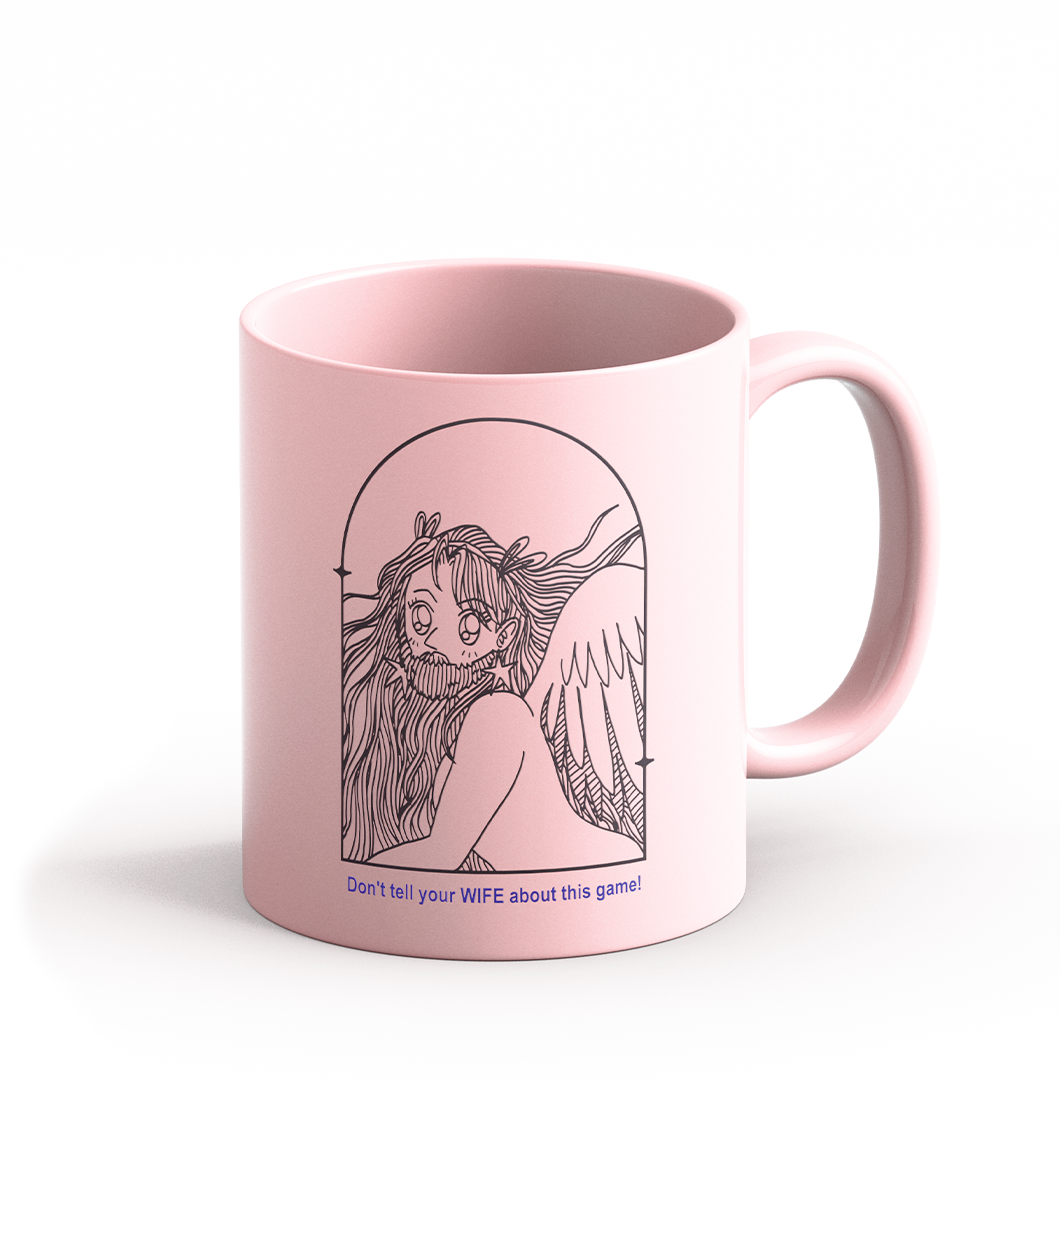 A light pink mug with an illustration of a long haired, bearded fairy creature. The text below the image reads "Don't tell your WIFE about this game!". From Brian David Gilbert.  